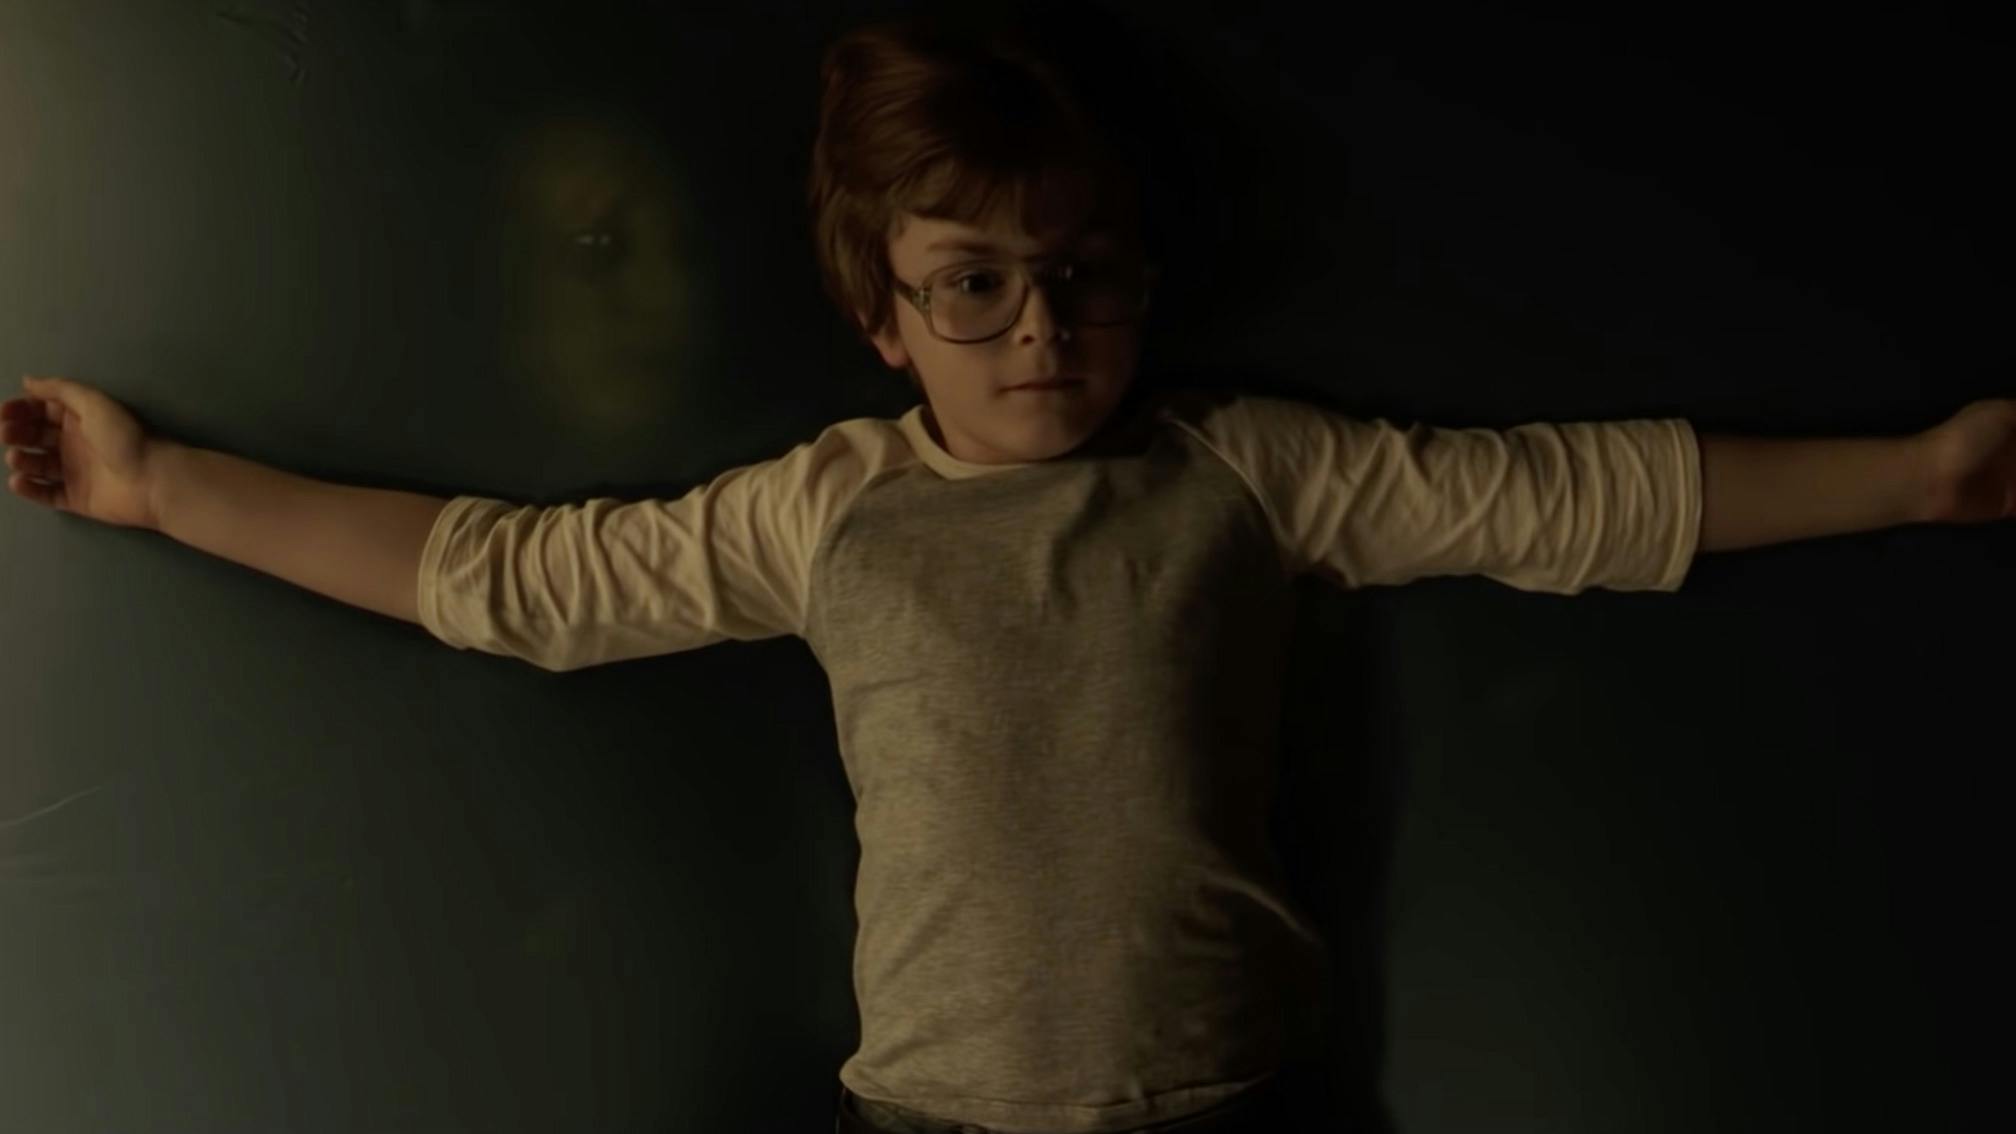 Watch the creepy new trailer for The Conjuring: The Devil Made Me Do It